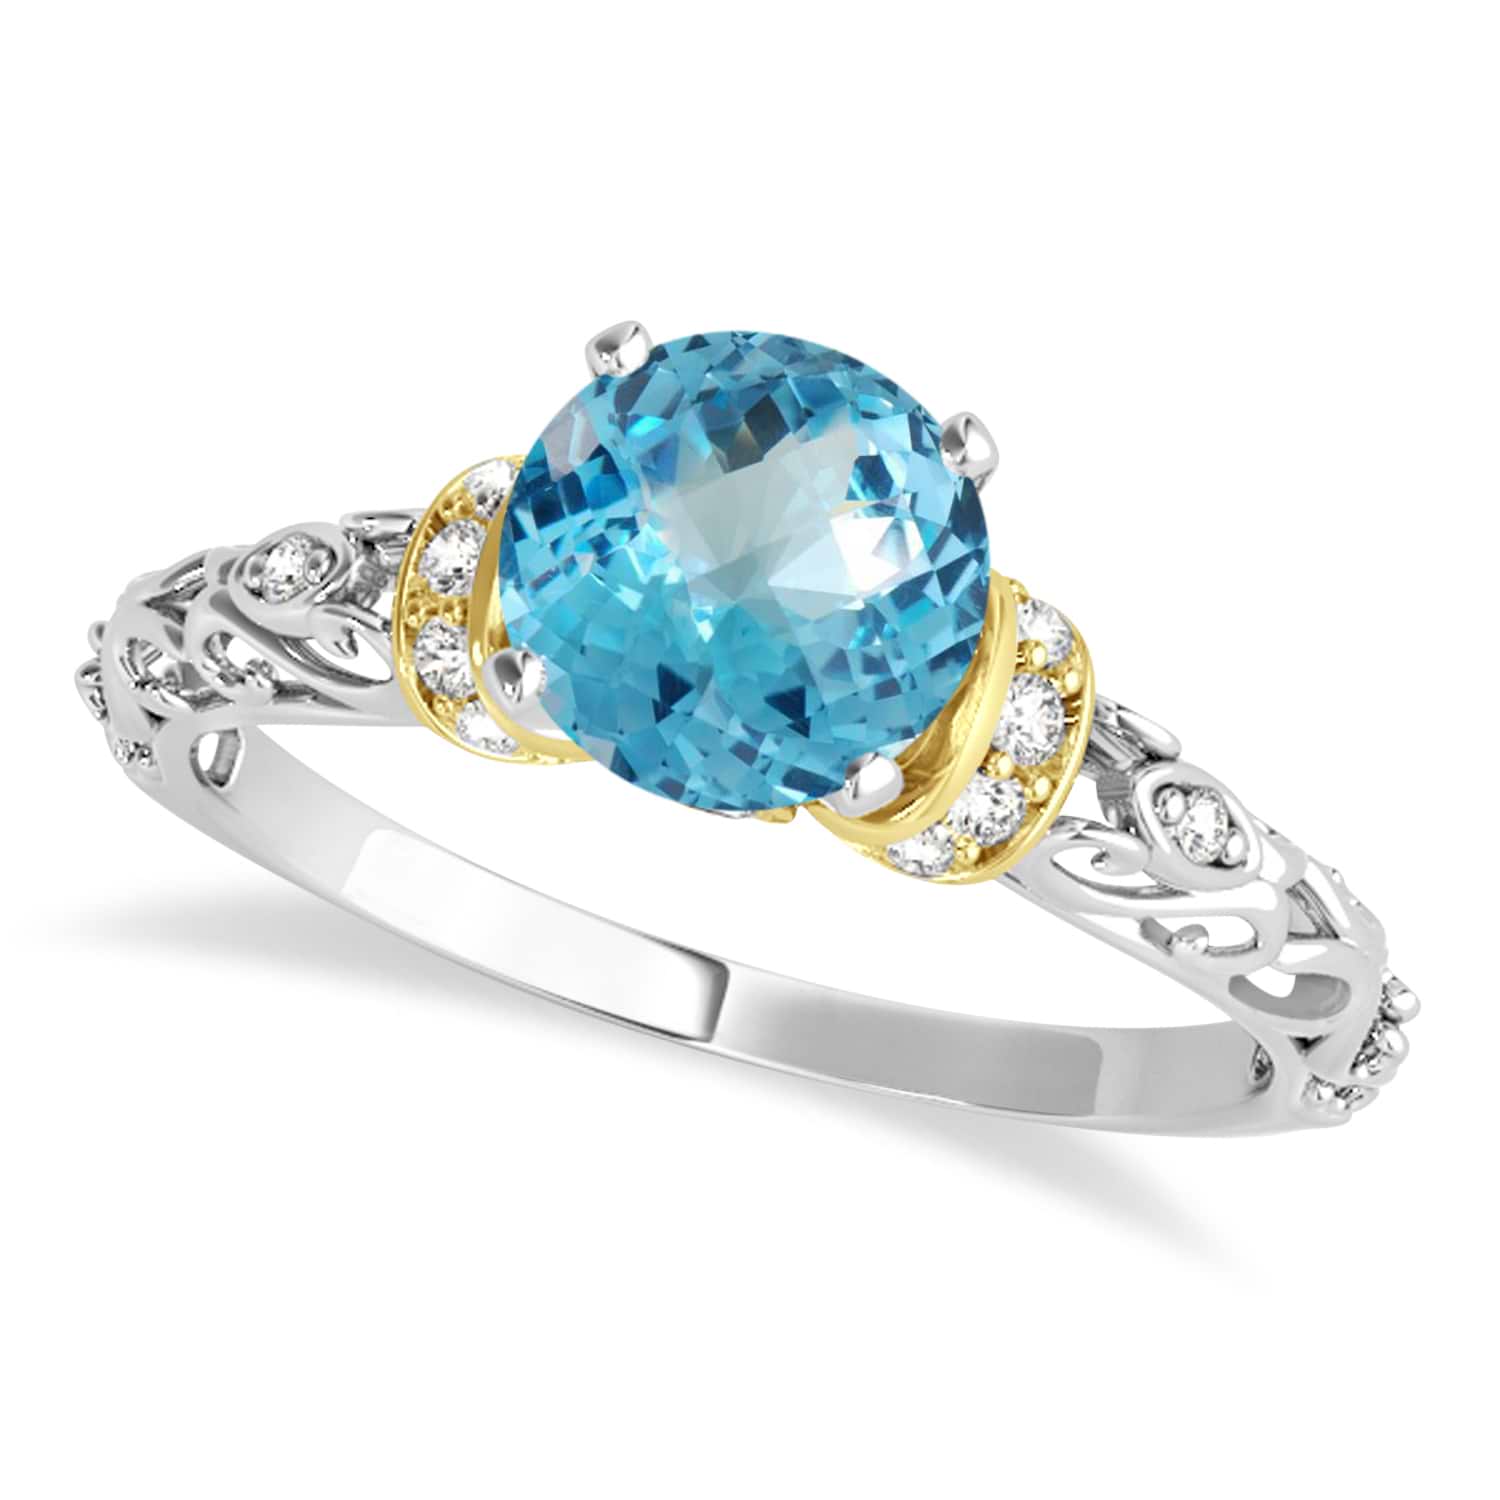 Blue Topaz & Diamond Antique Style Engagement Ring 18k Two-Tone Gold (0.87ct)